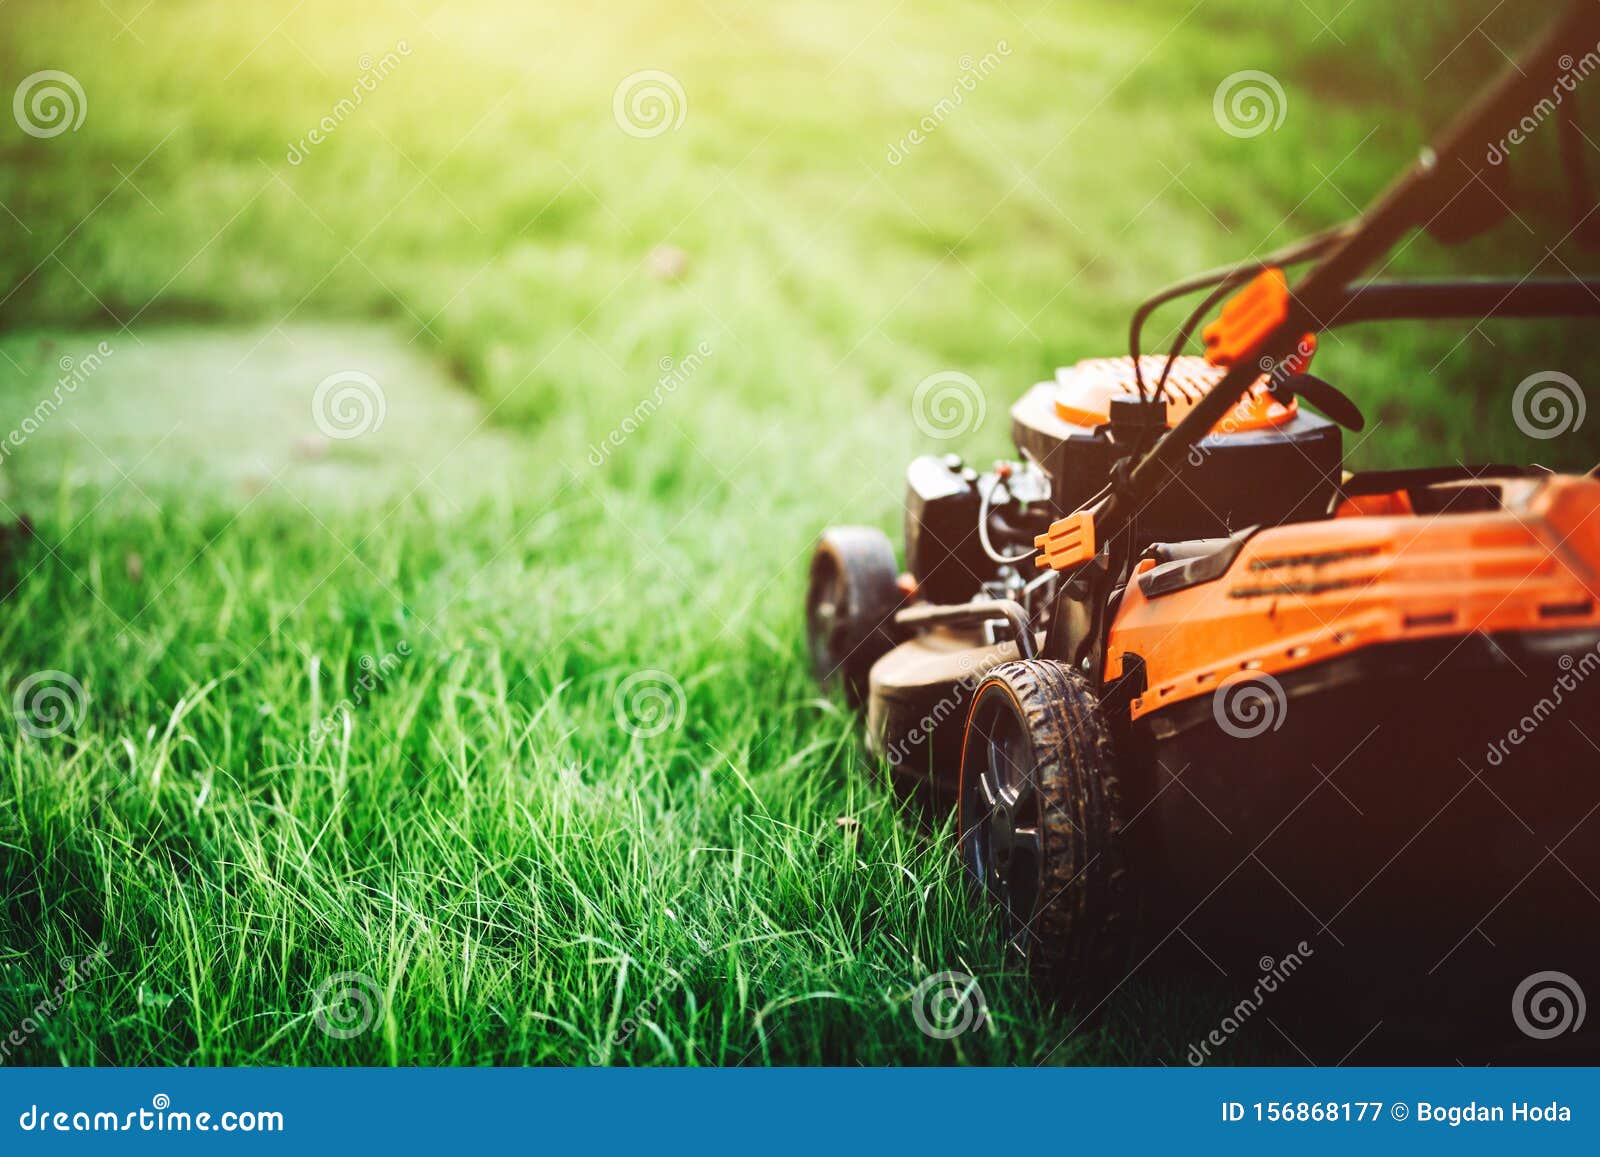 cutting grass in backyard. gardening and landscaping concept